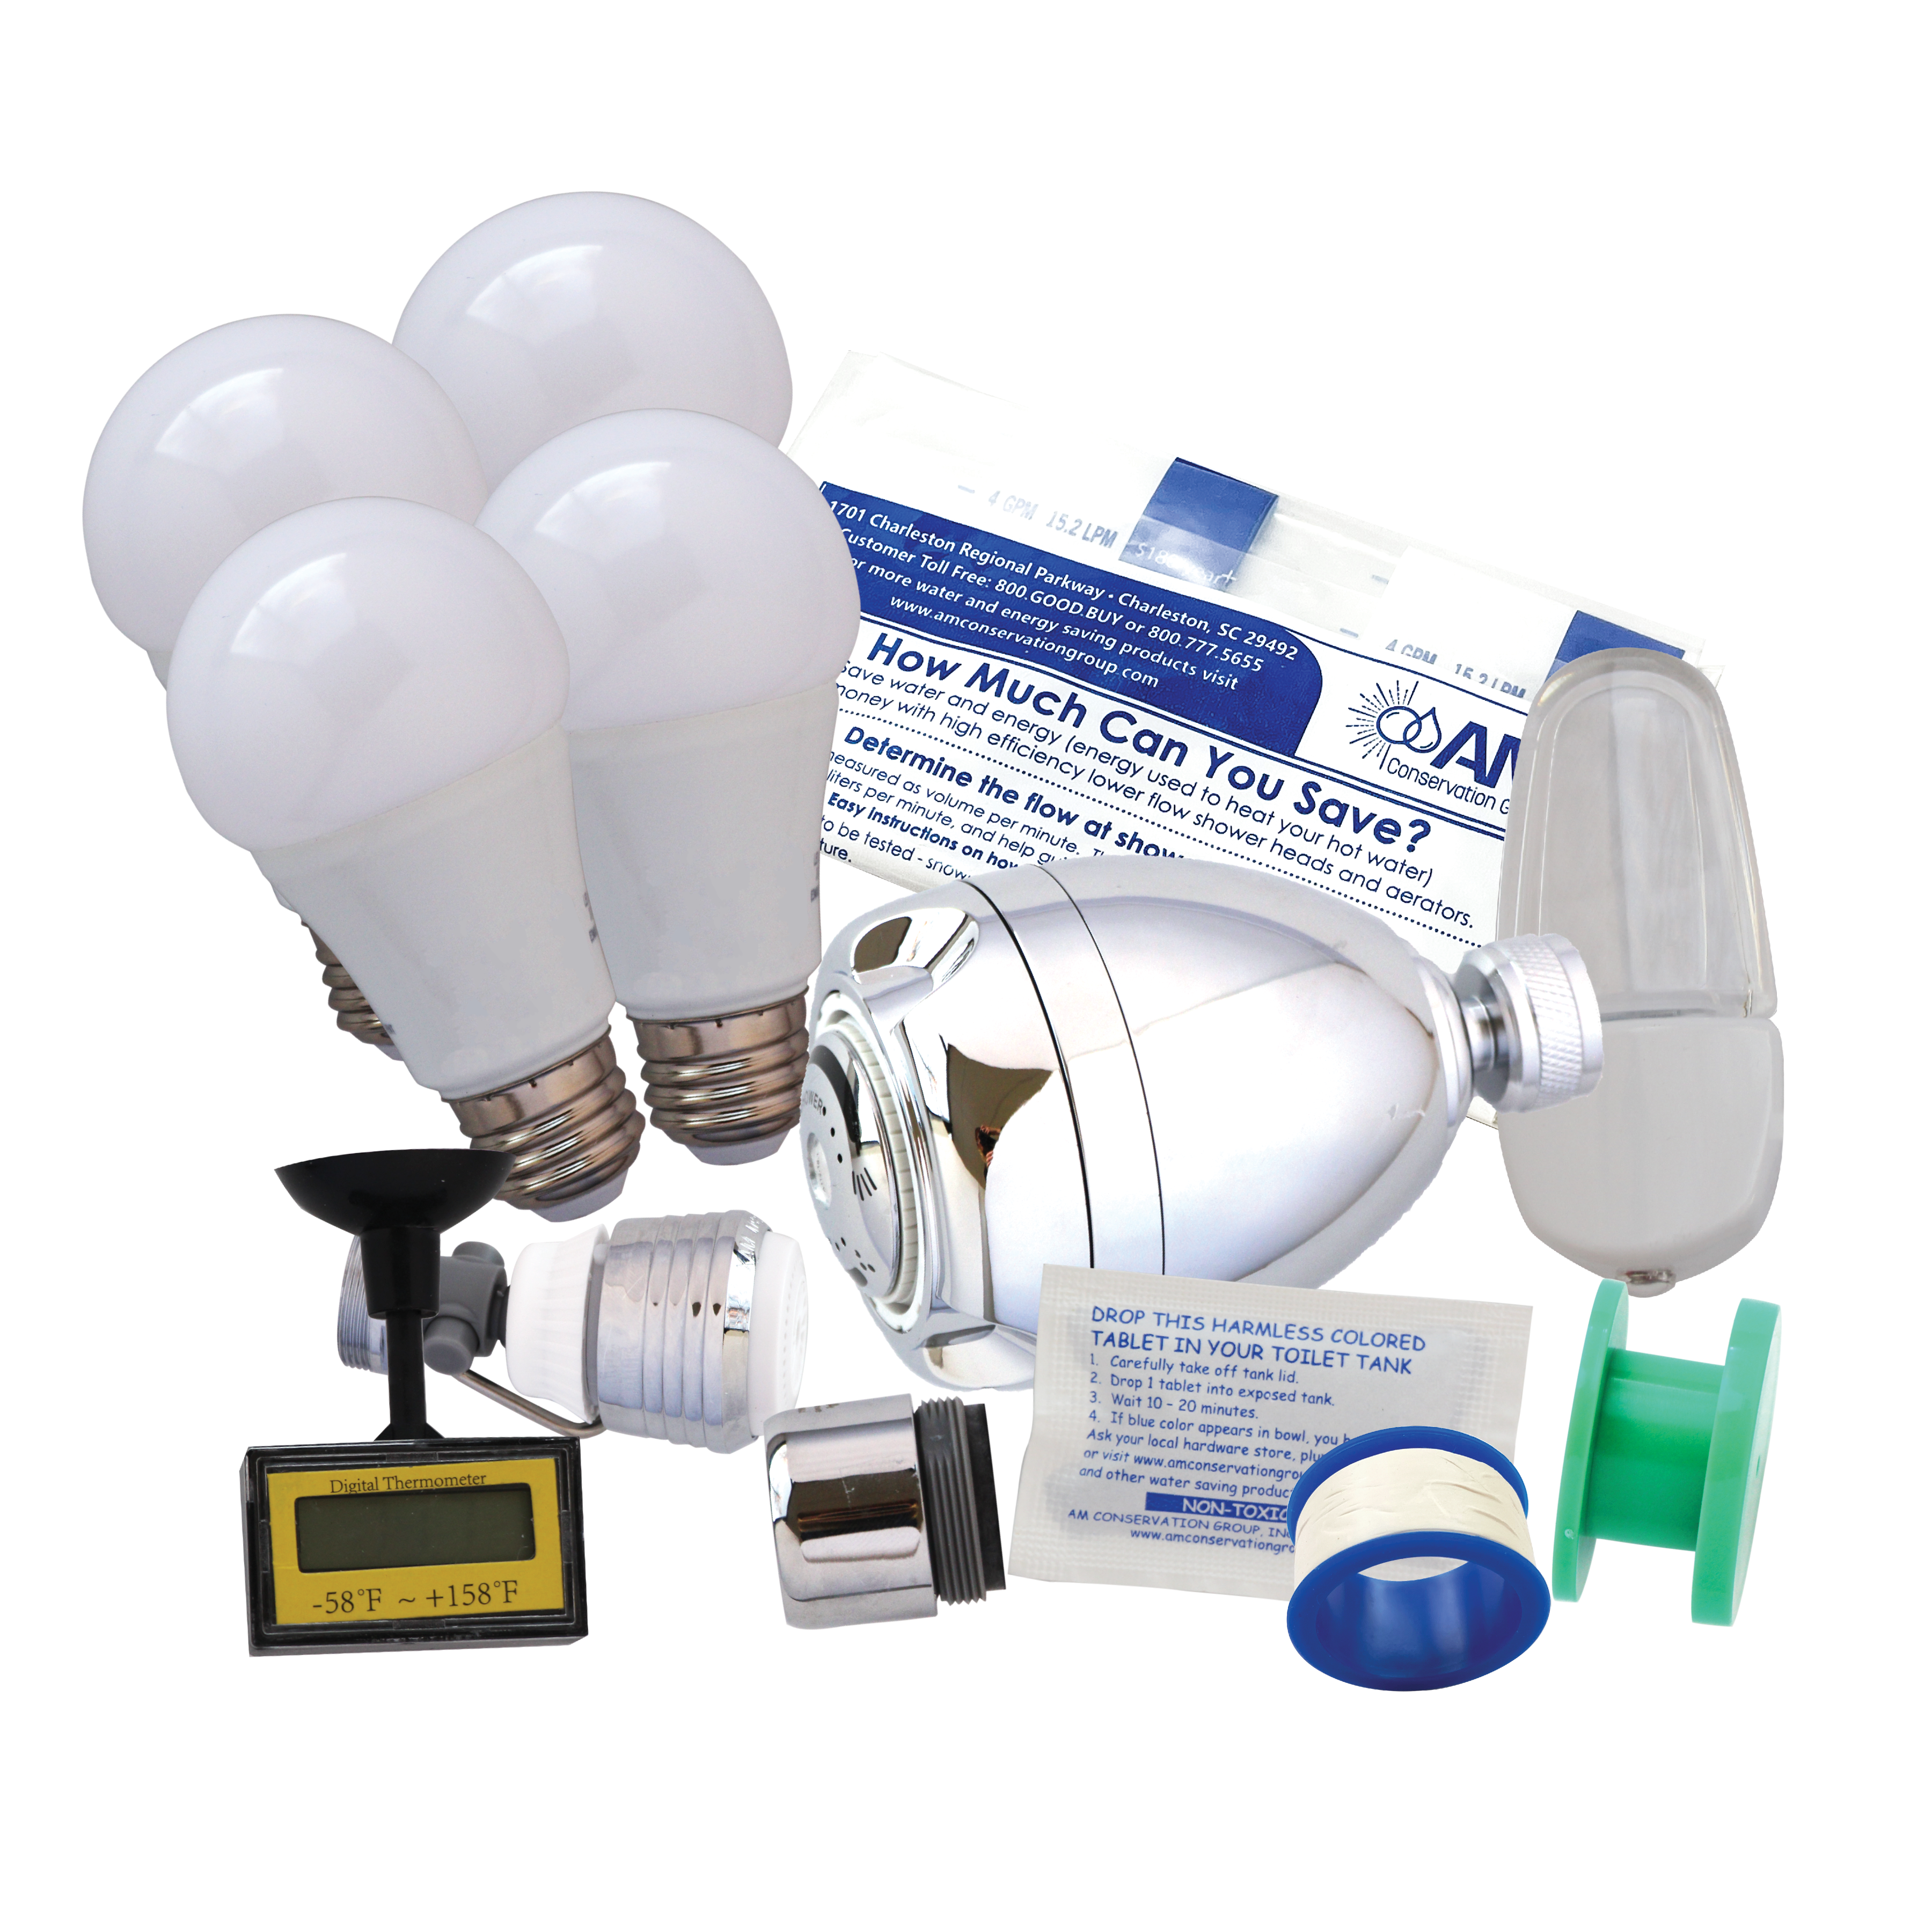 energy saving lightbulbs and other devices included in kit